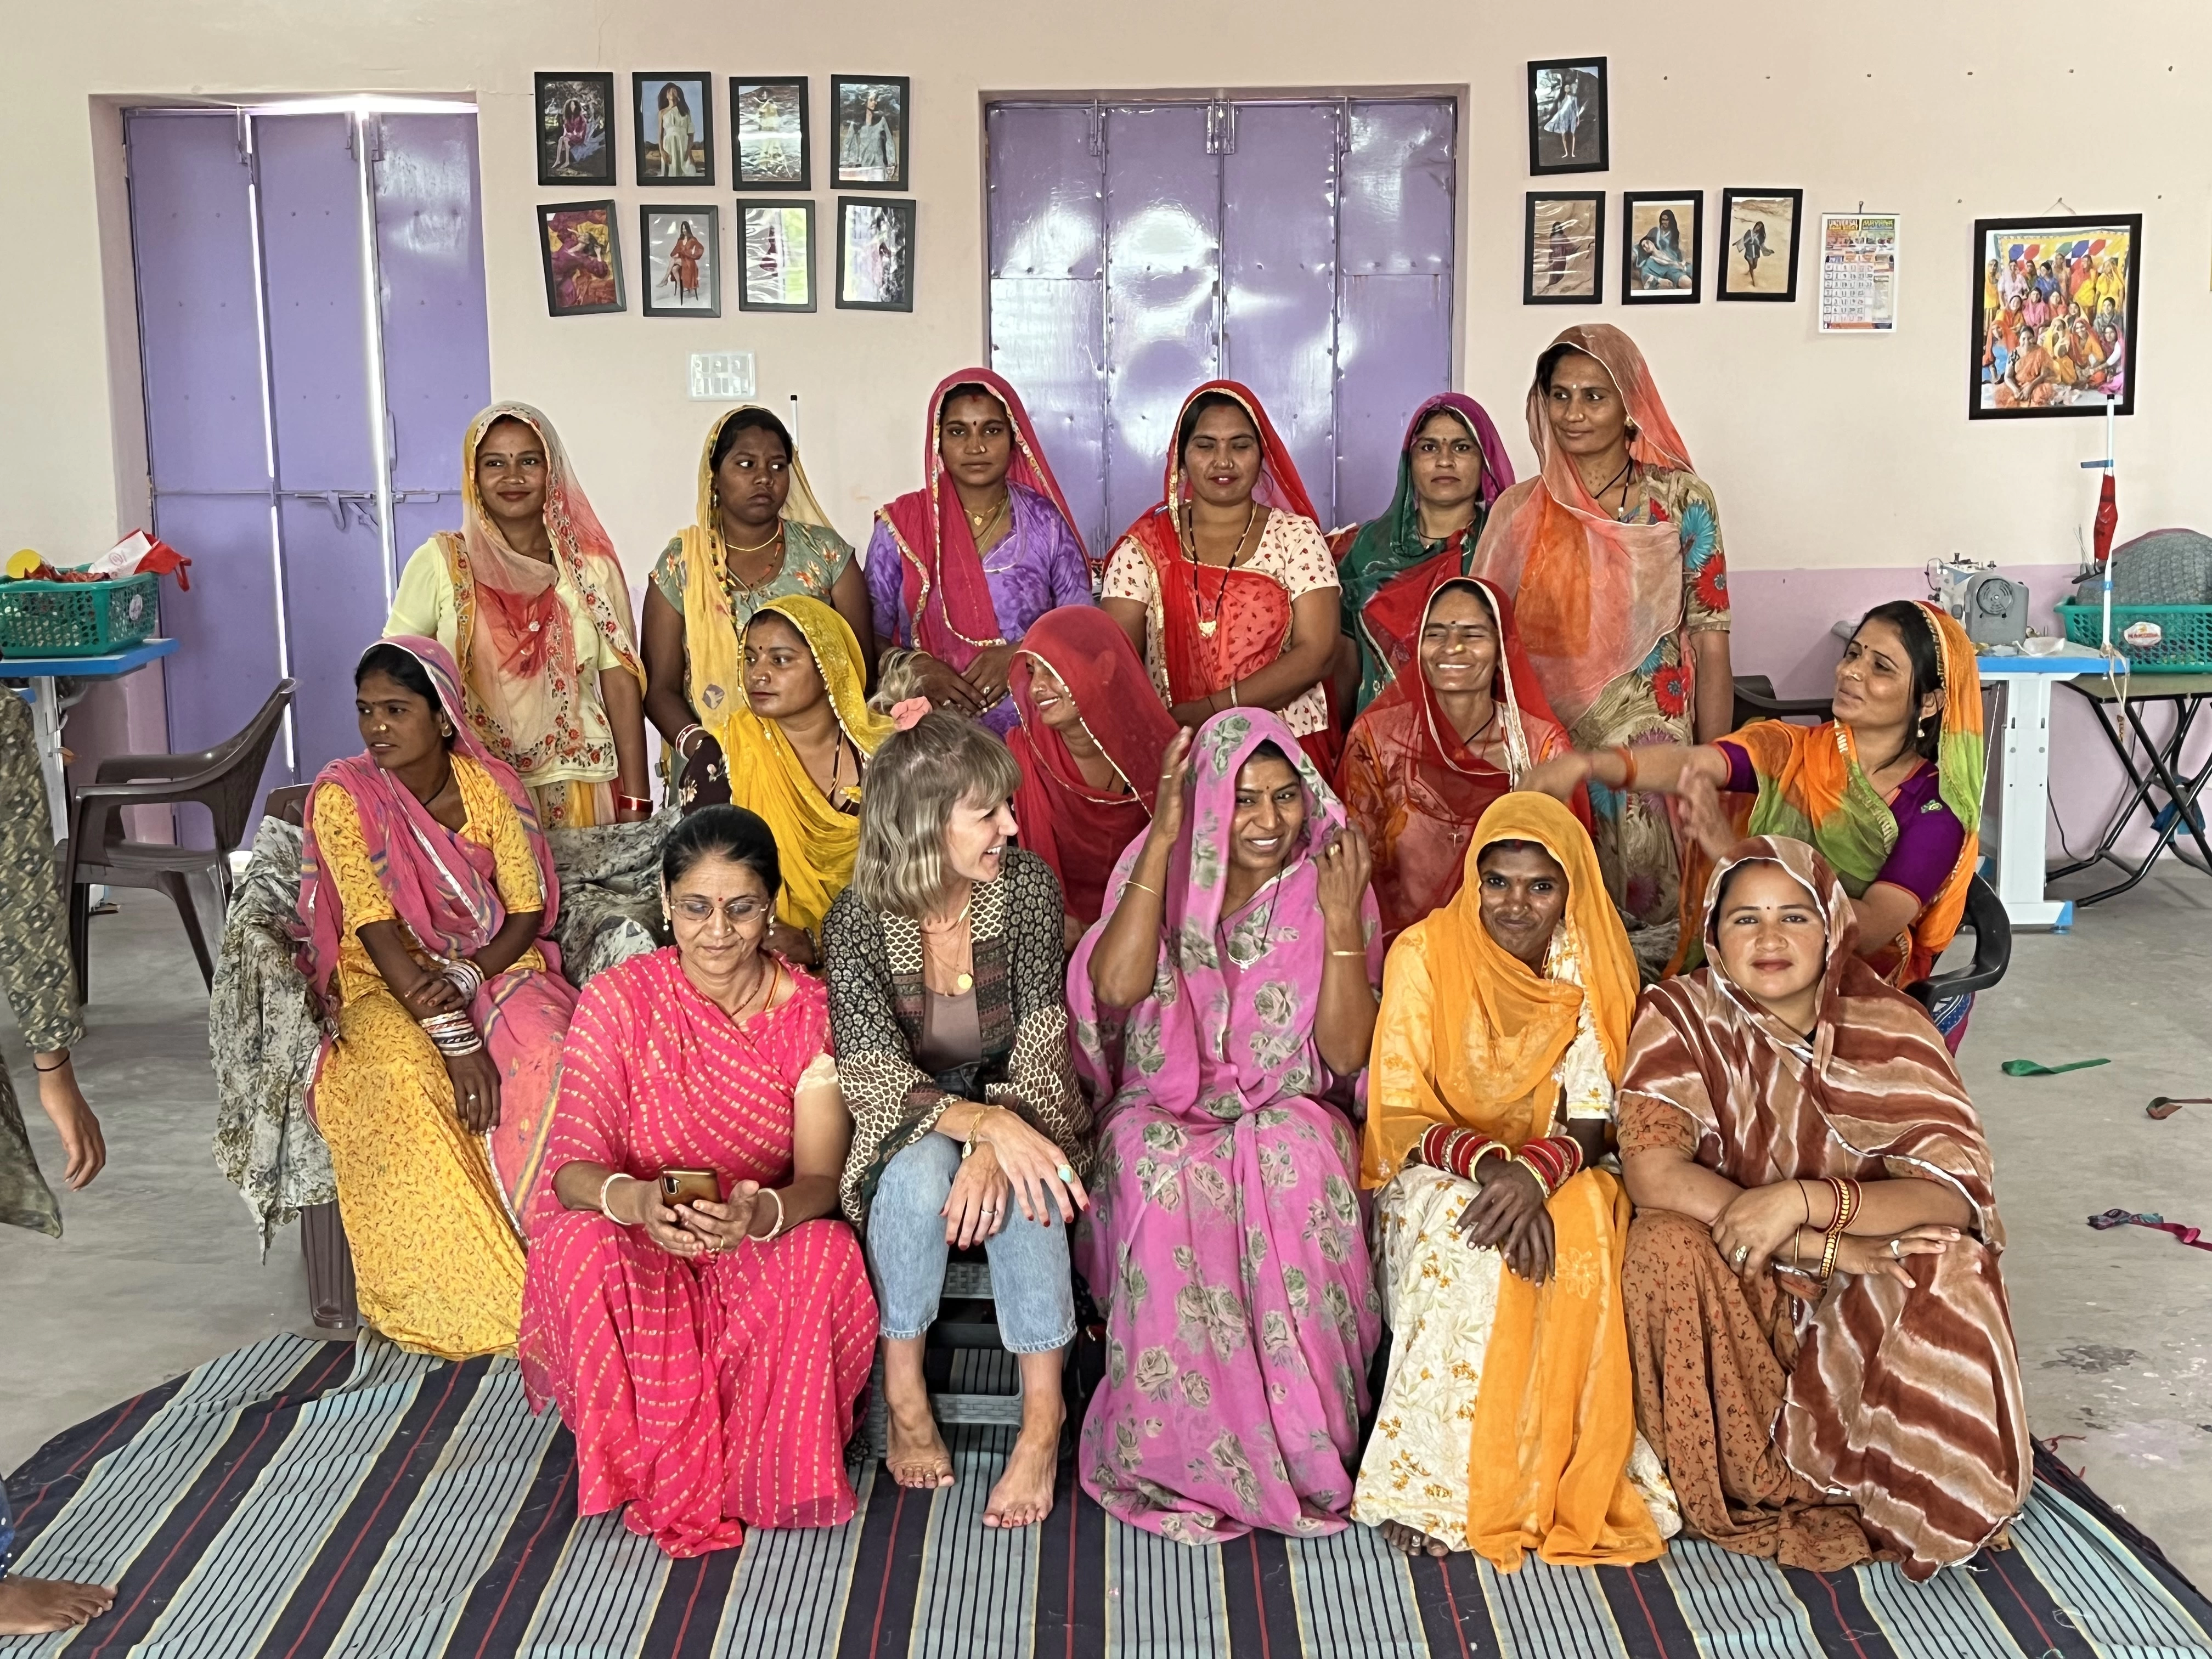 Katie, founder of Loft & Daughter, with the female artisans of Saheli Women